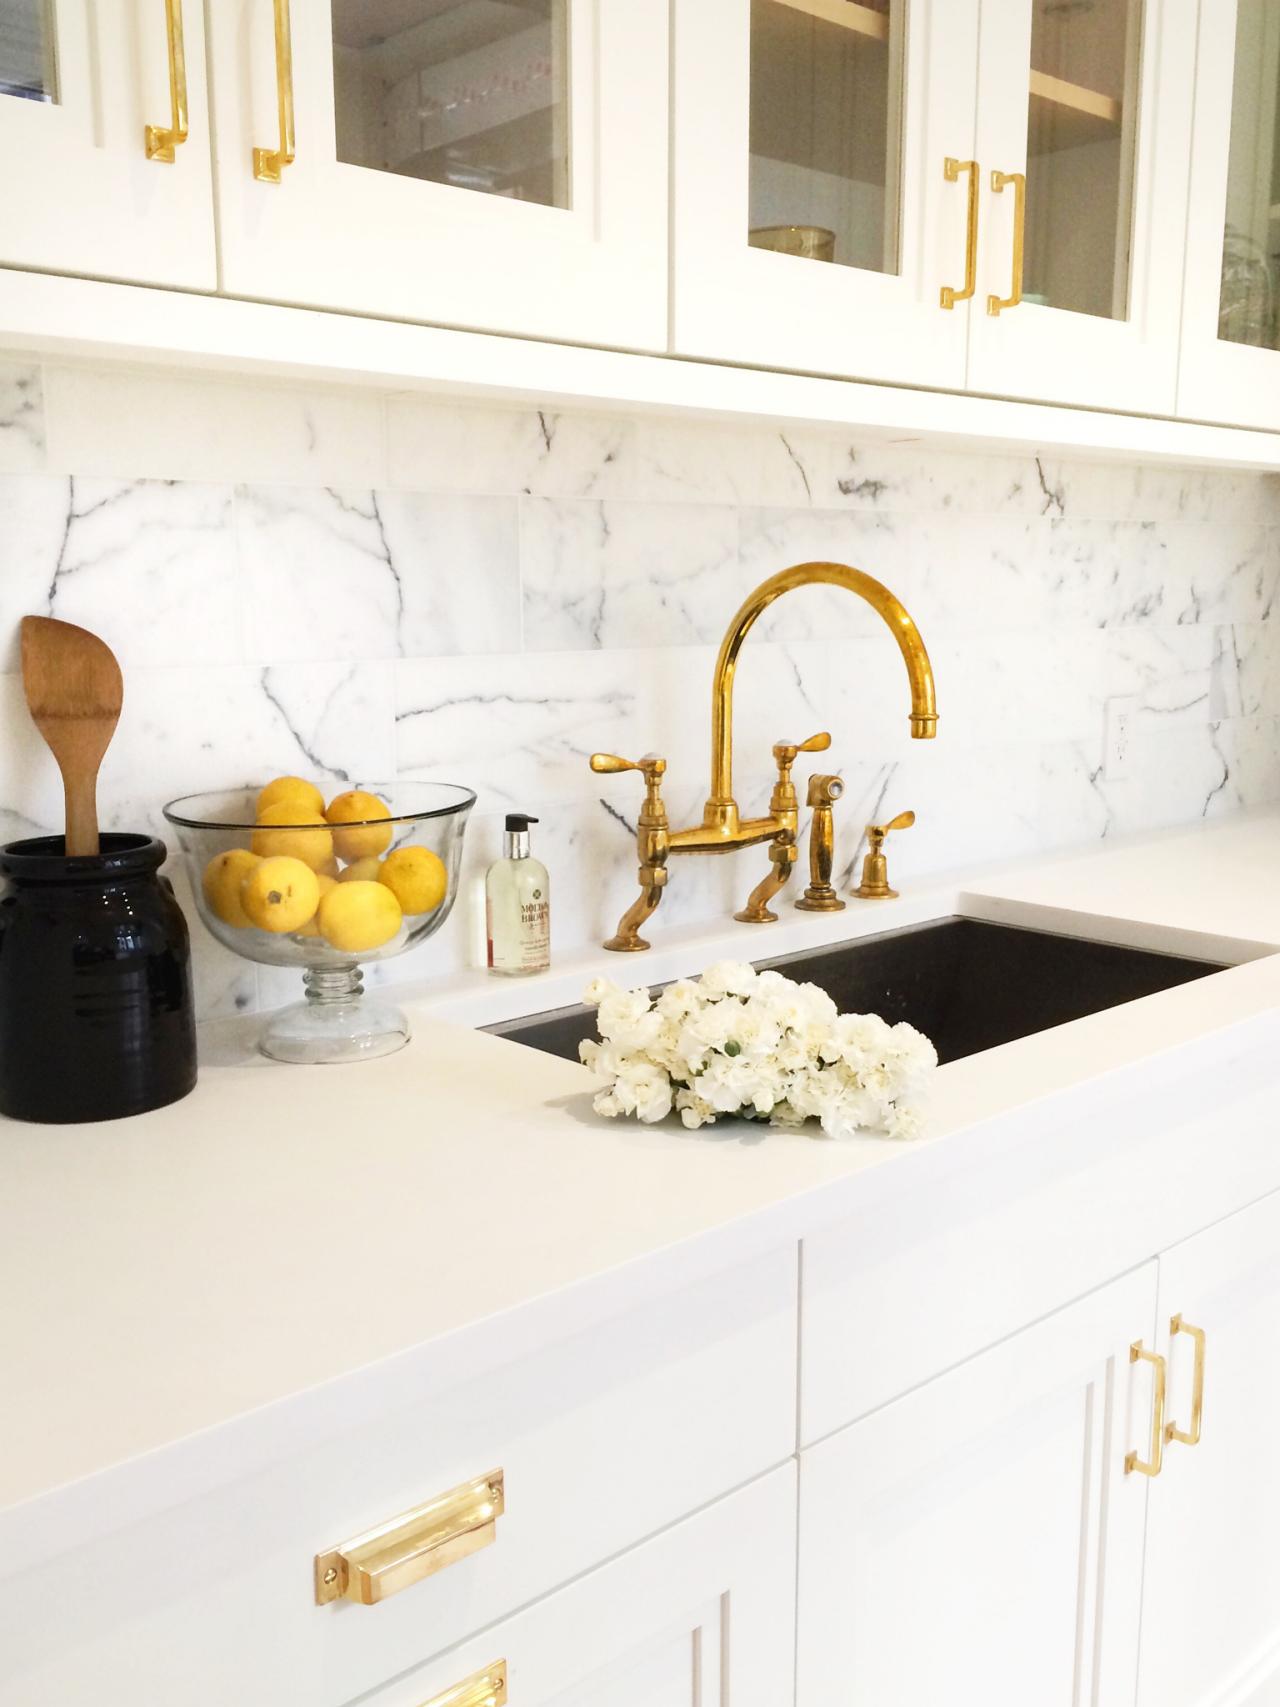 Delighful White Kitchen Sink Faucet I With Inspiration Decorating inside Amazing gold kitchen sink faucet Best Photo Reference